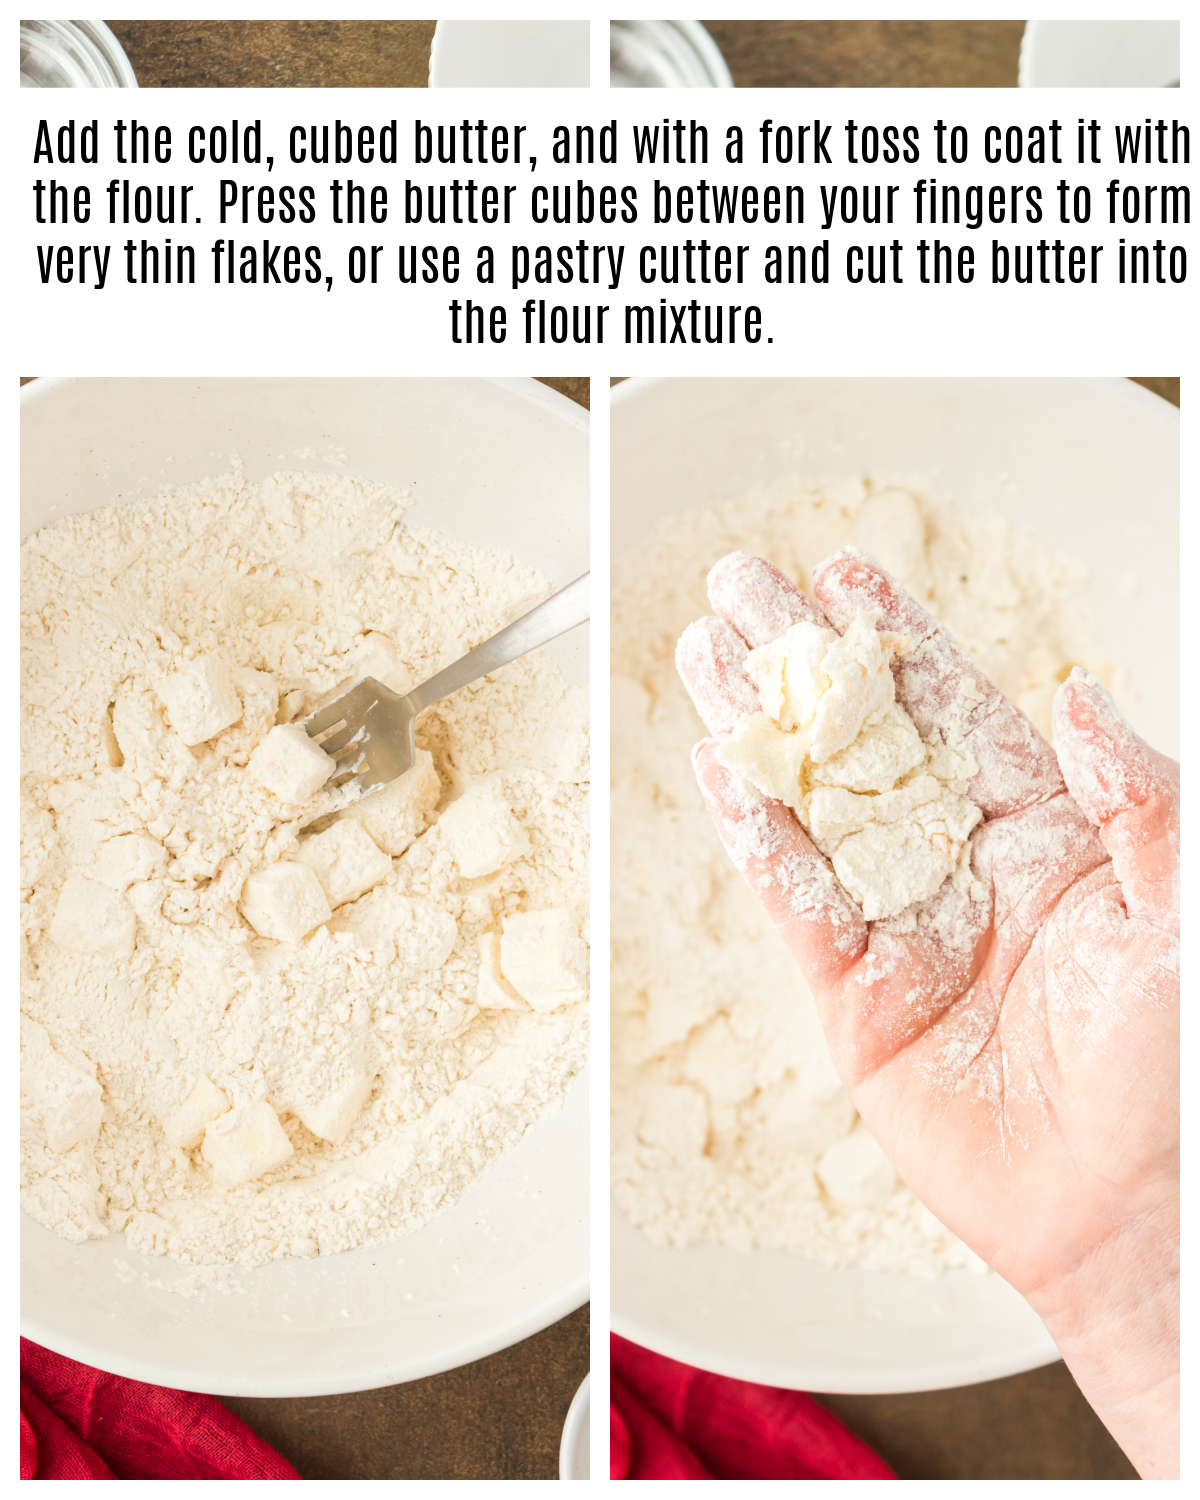 cold butter cubed and cut into flour mixture